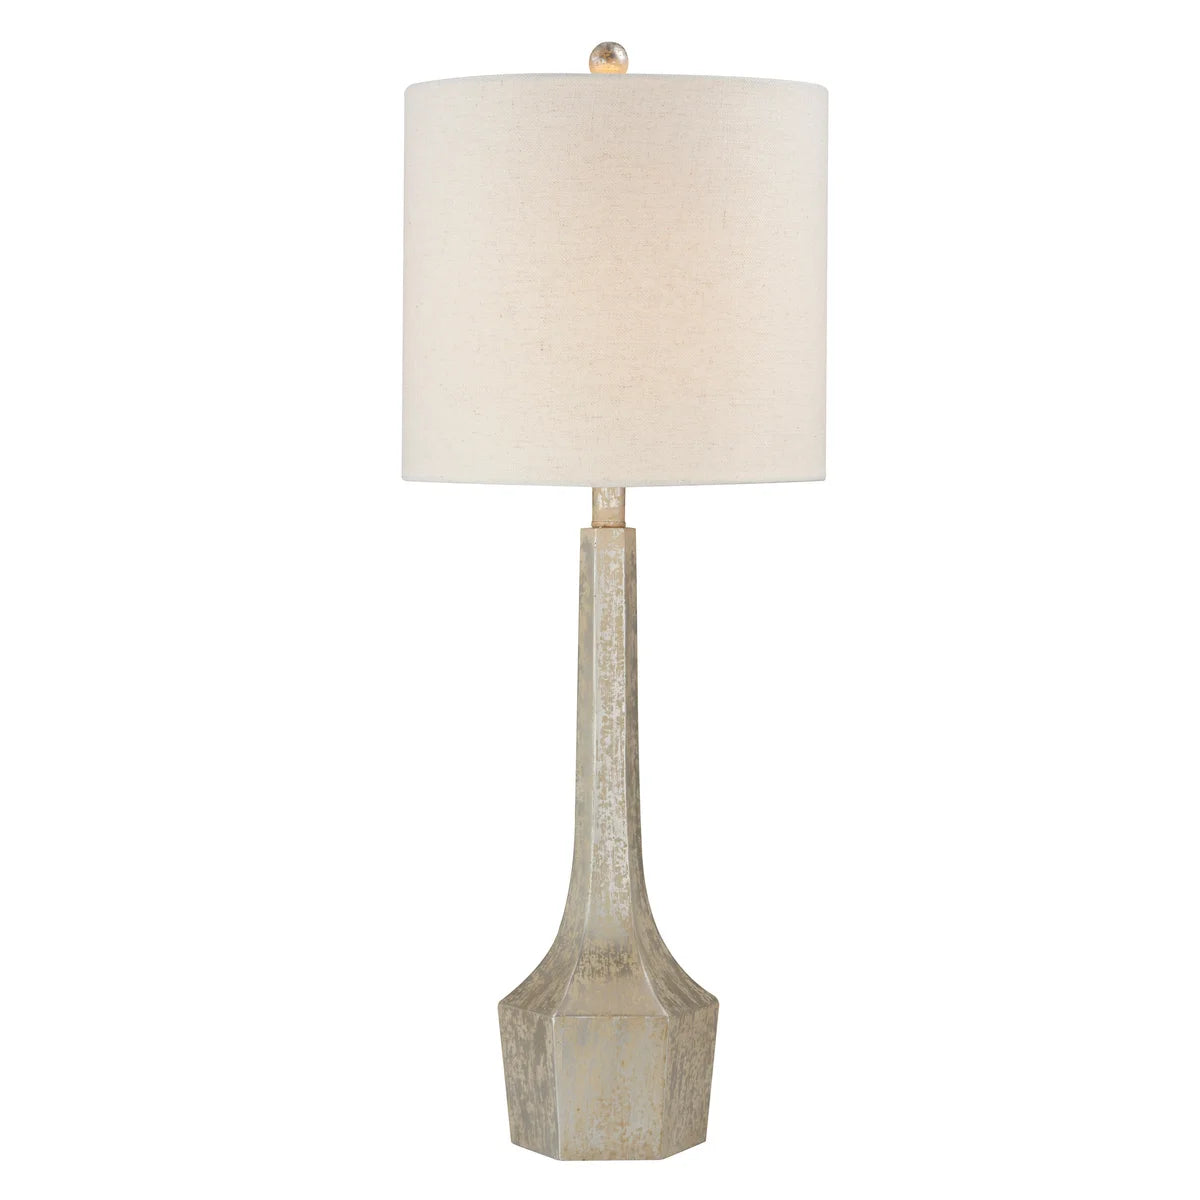 Forty West Designs 710246 Maya Silver and Pewter Table Lamp